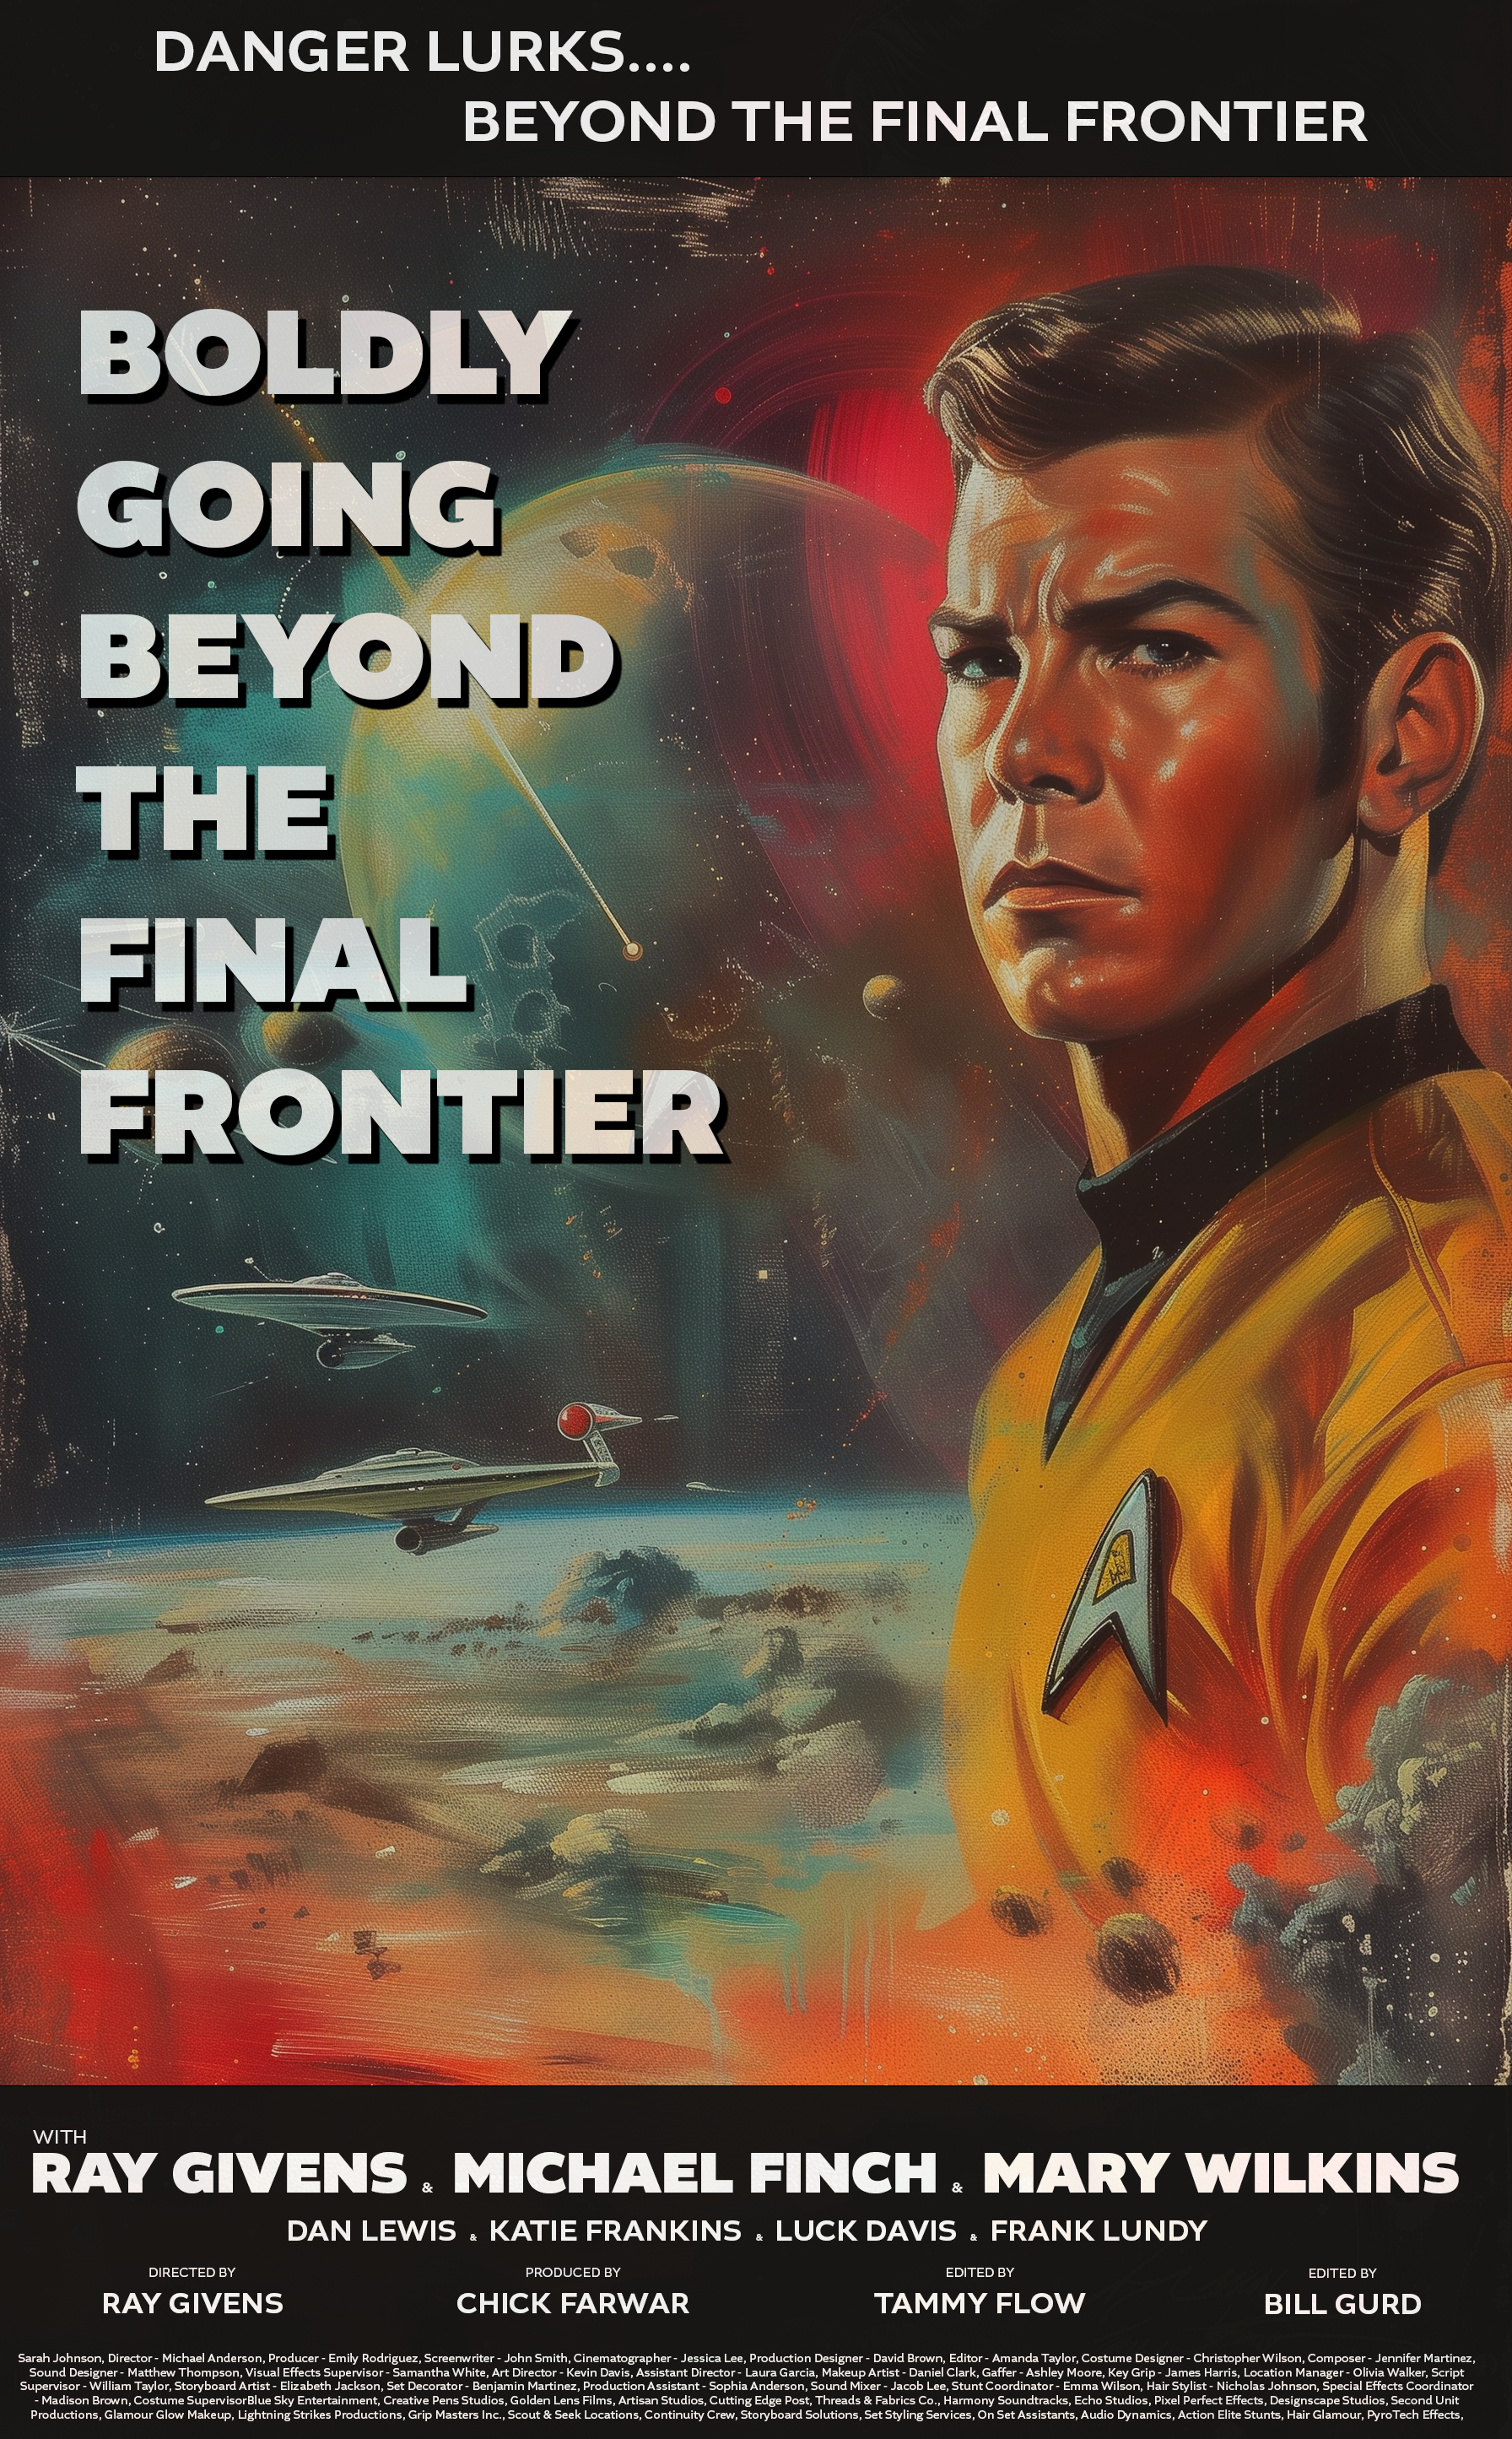 Name:  Beyond the Final Frontier.png
Views: 201
Size:  8.19 MB